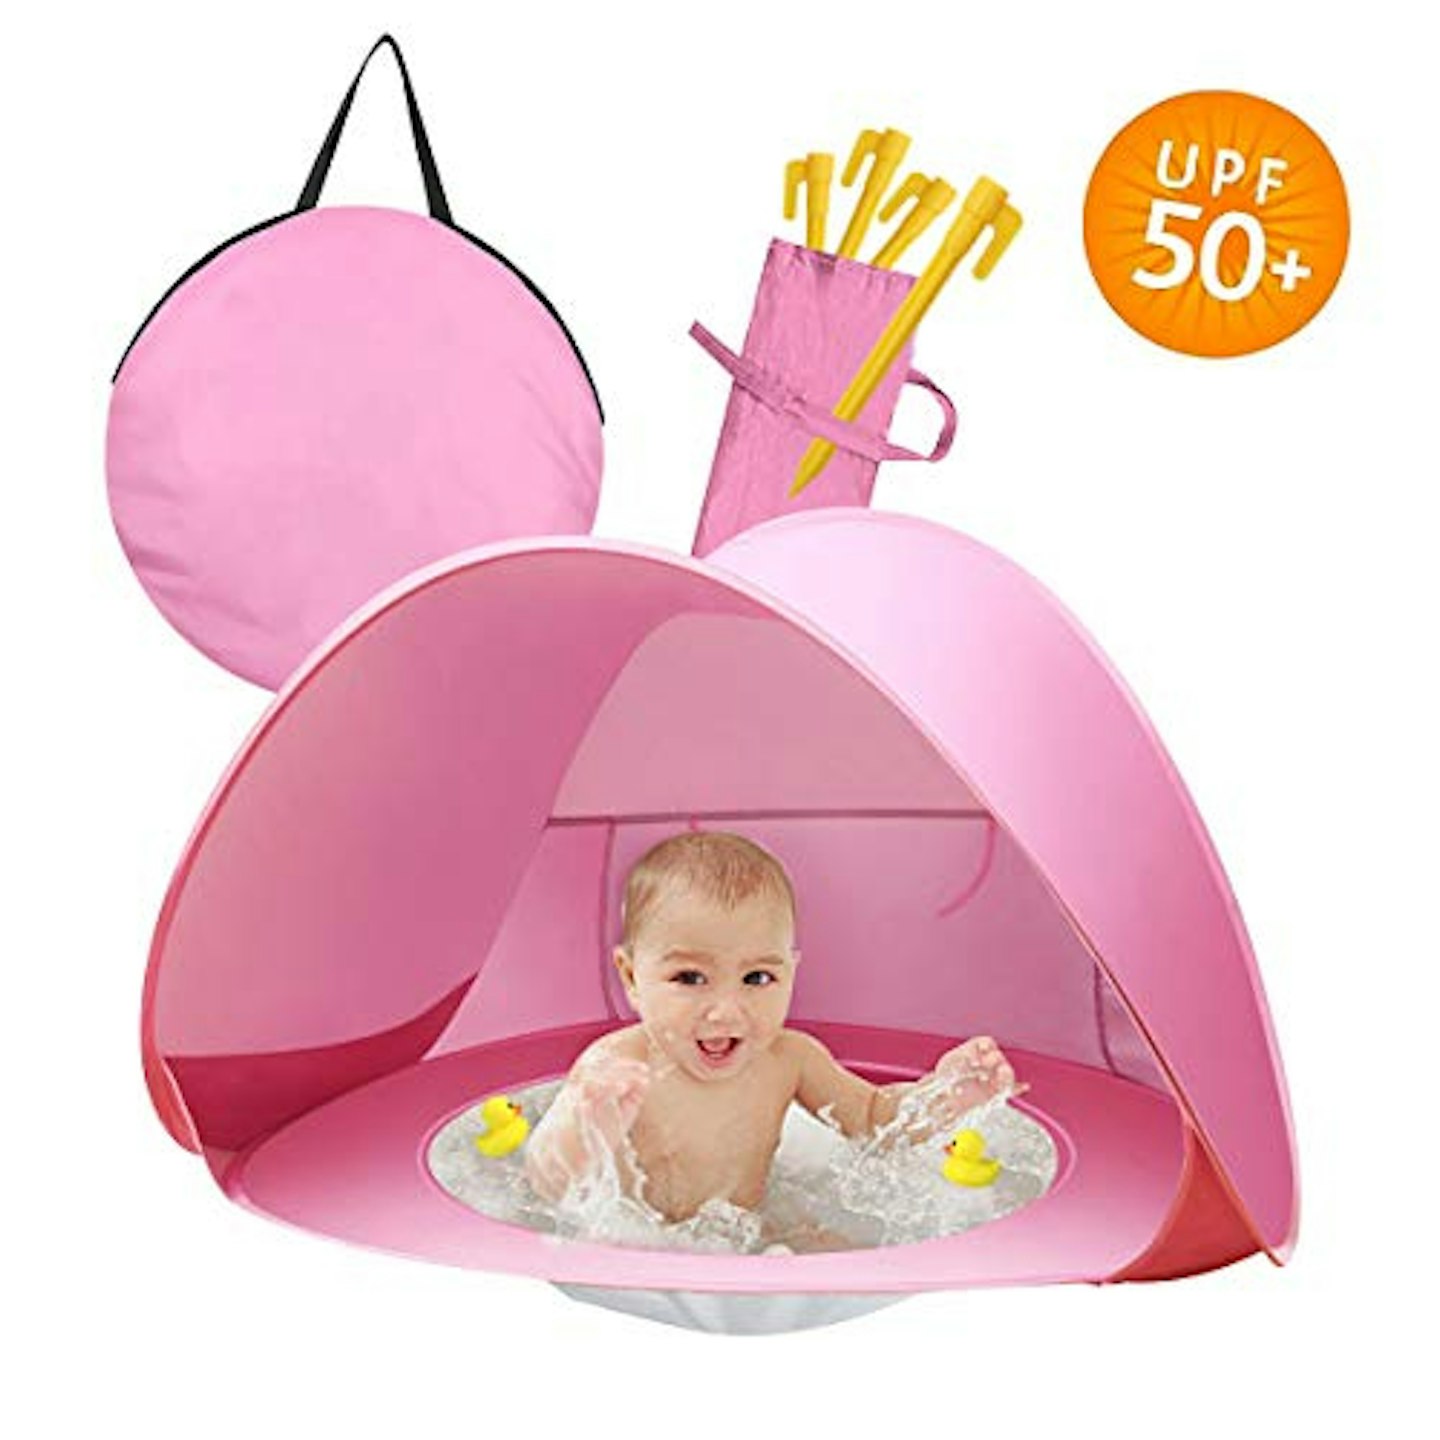 Best with a pool: Baby beach tent with pool